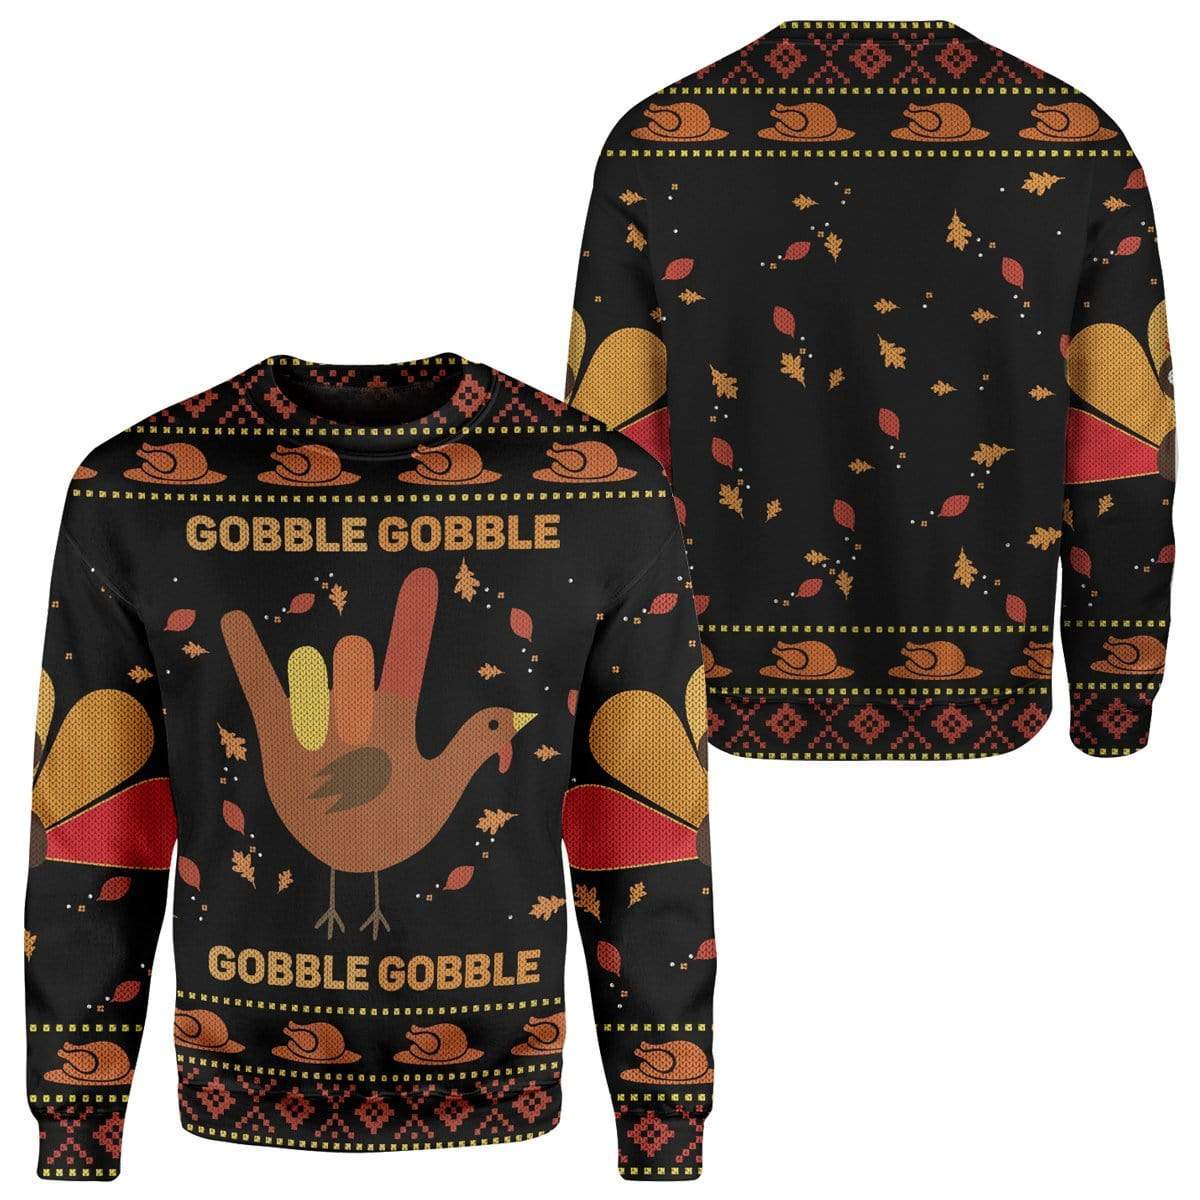 Custom Ugly Gobble Christmas Sweater Jumper HD-DT17101914 Ugly Christmas Sweater 